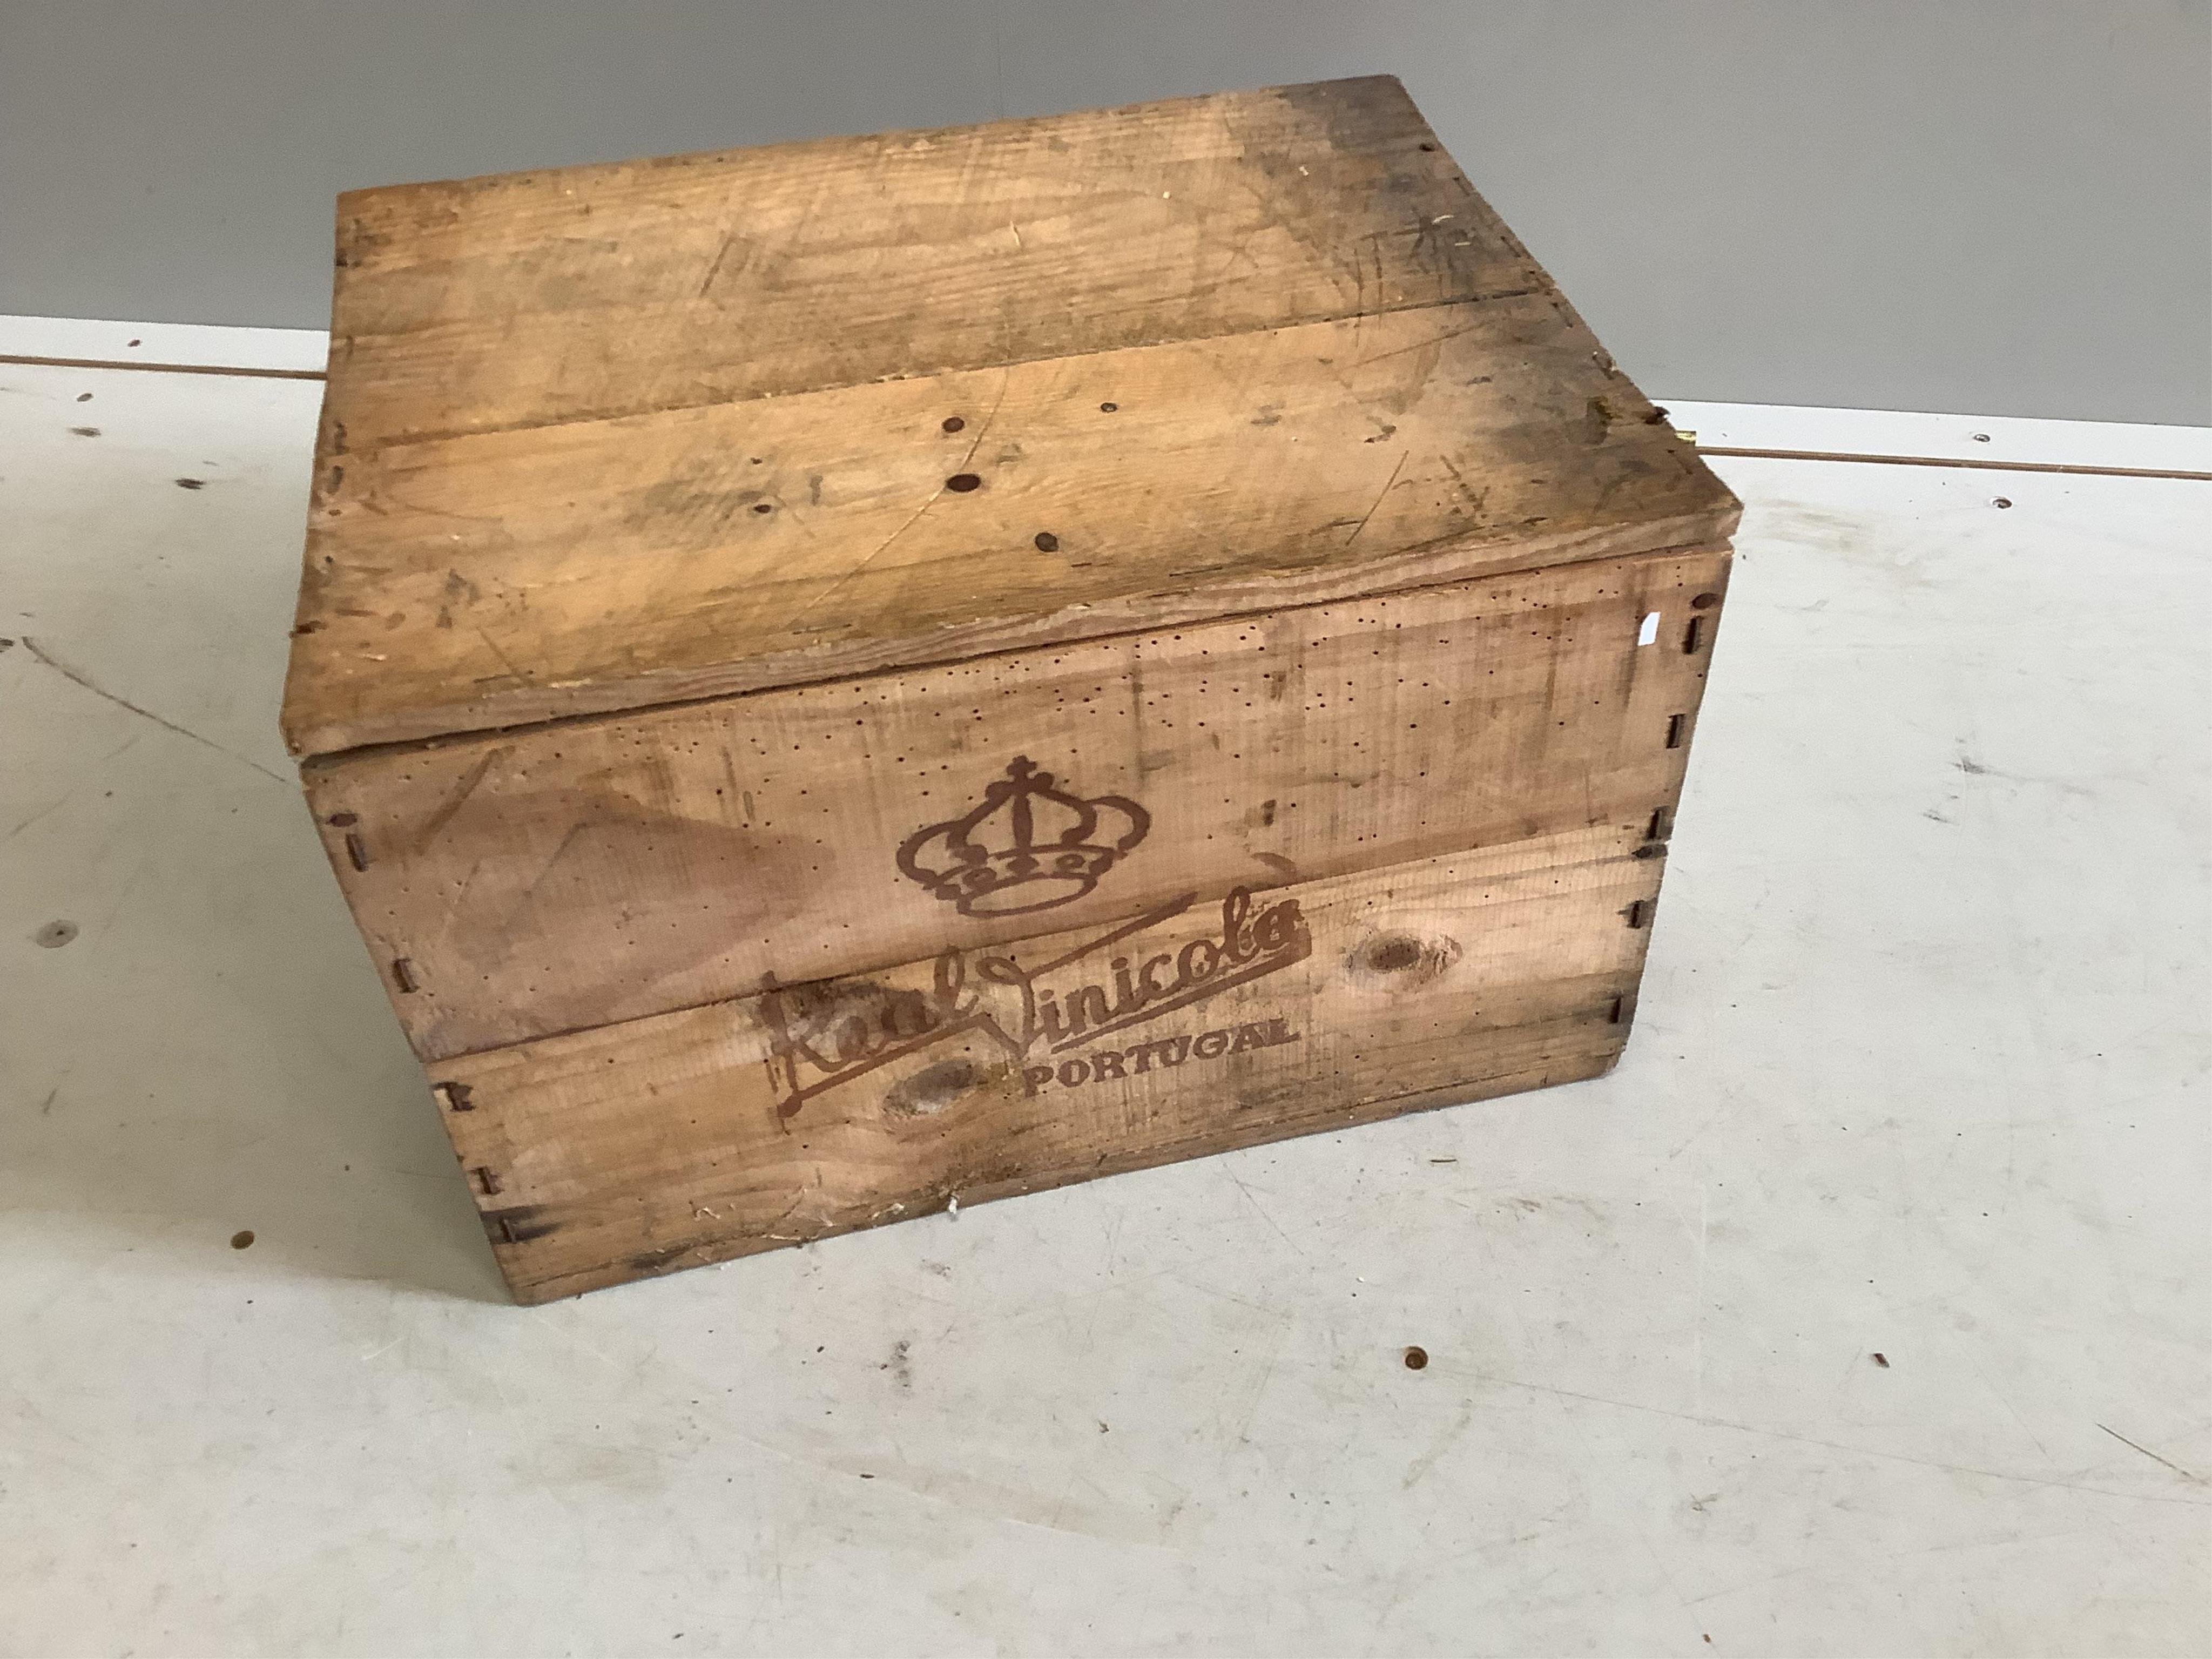 Seven vintage port, whisky and fruit crates, largest width 43cm, height 27cm. Condition - poor